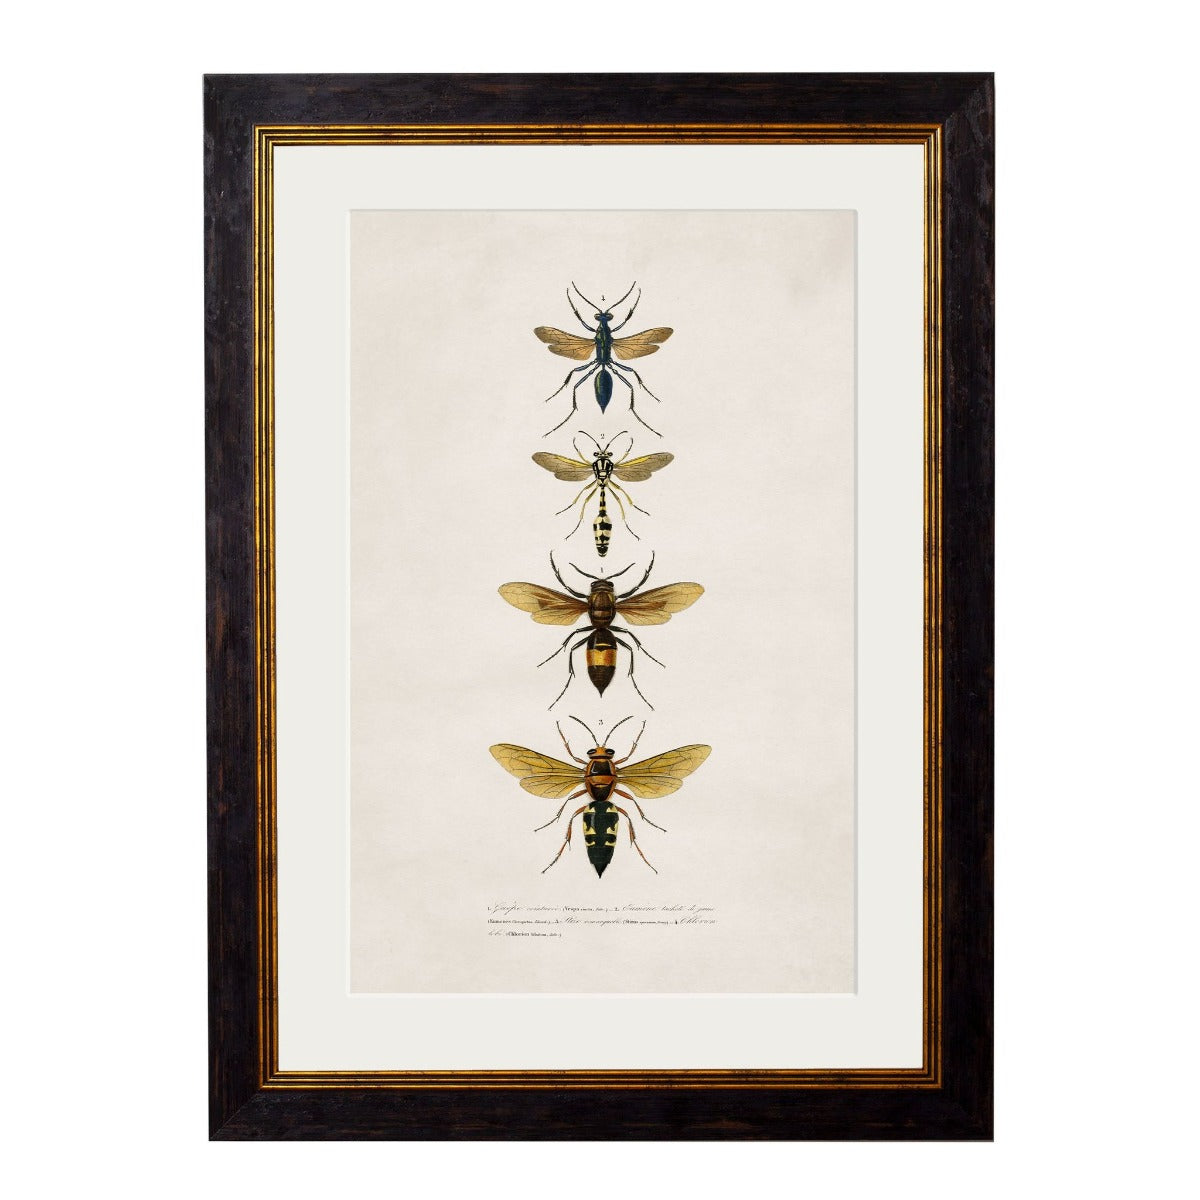 1892 'Bees and Wasps' Framed Print